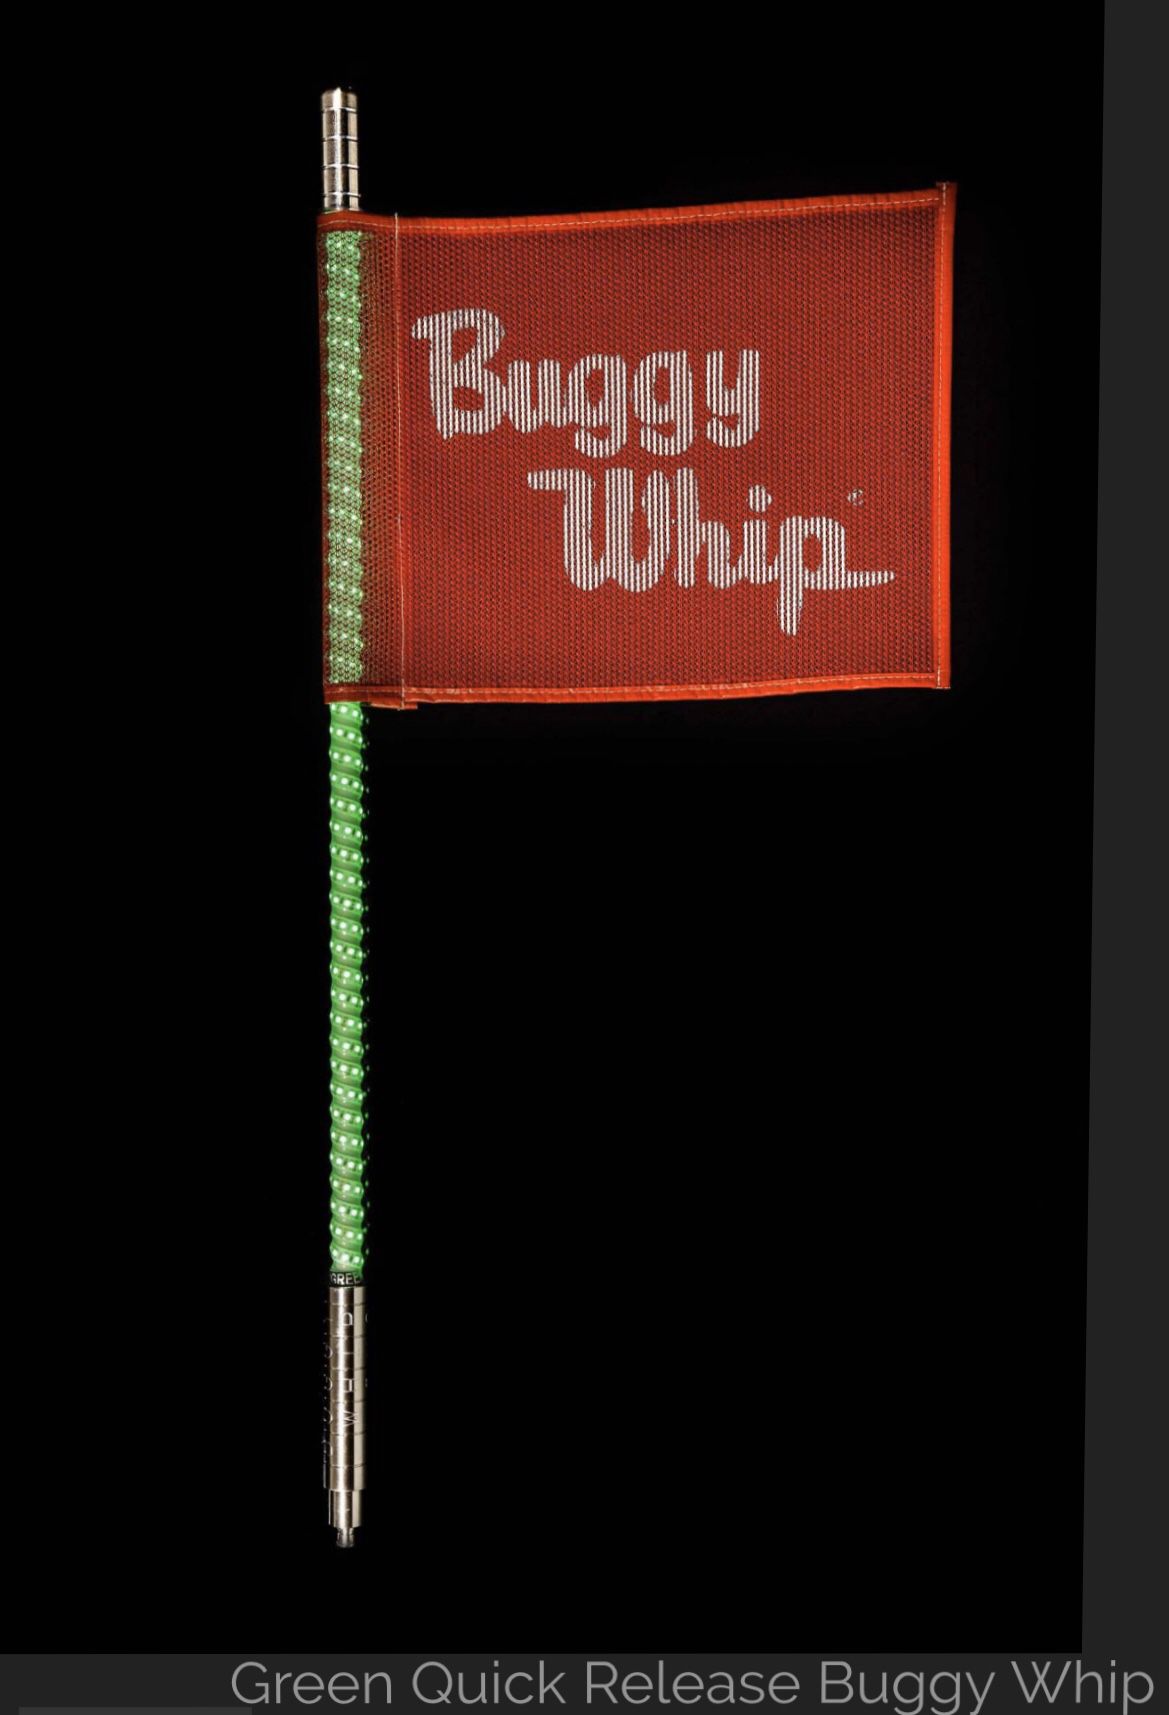 Buggy Whip